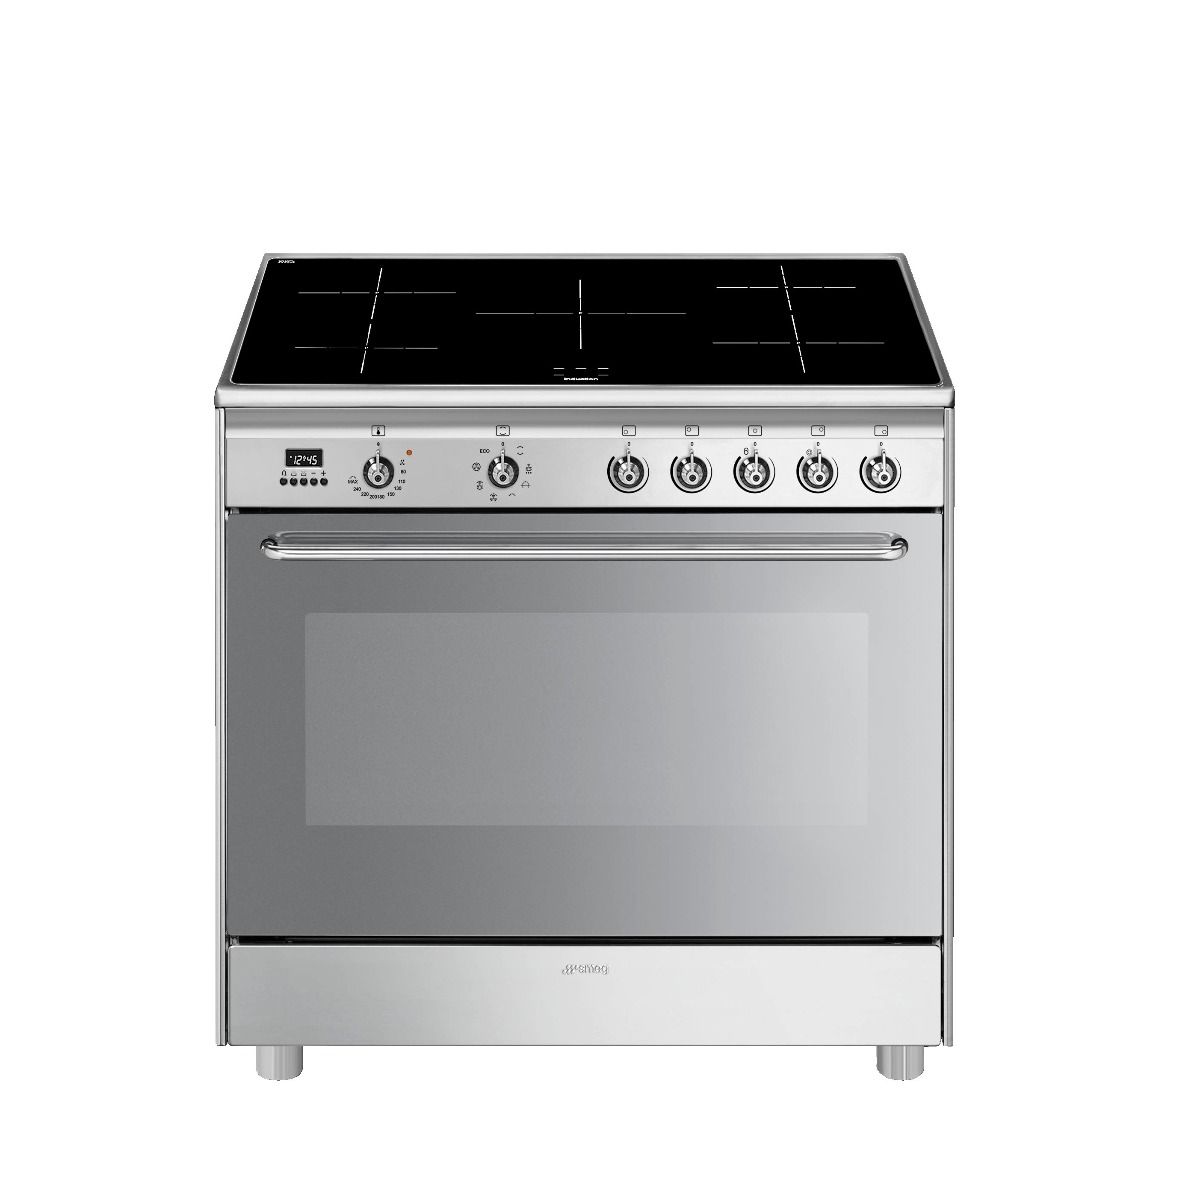 cheap electric oven and hob